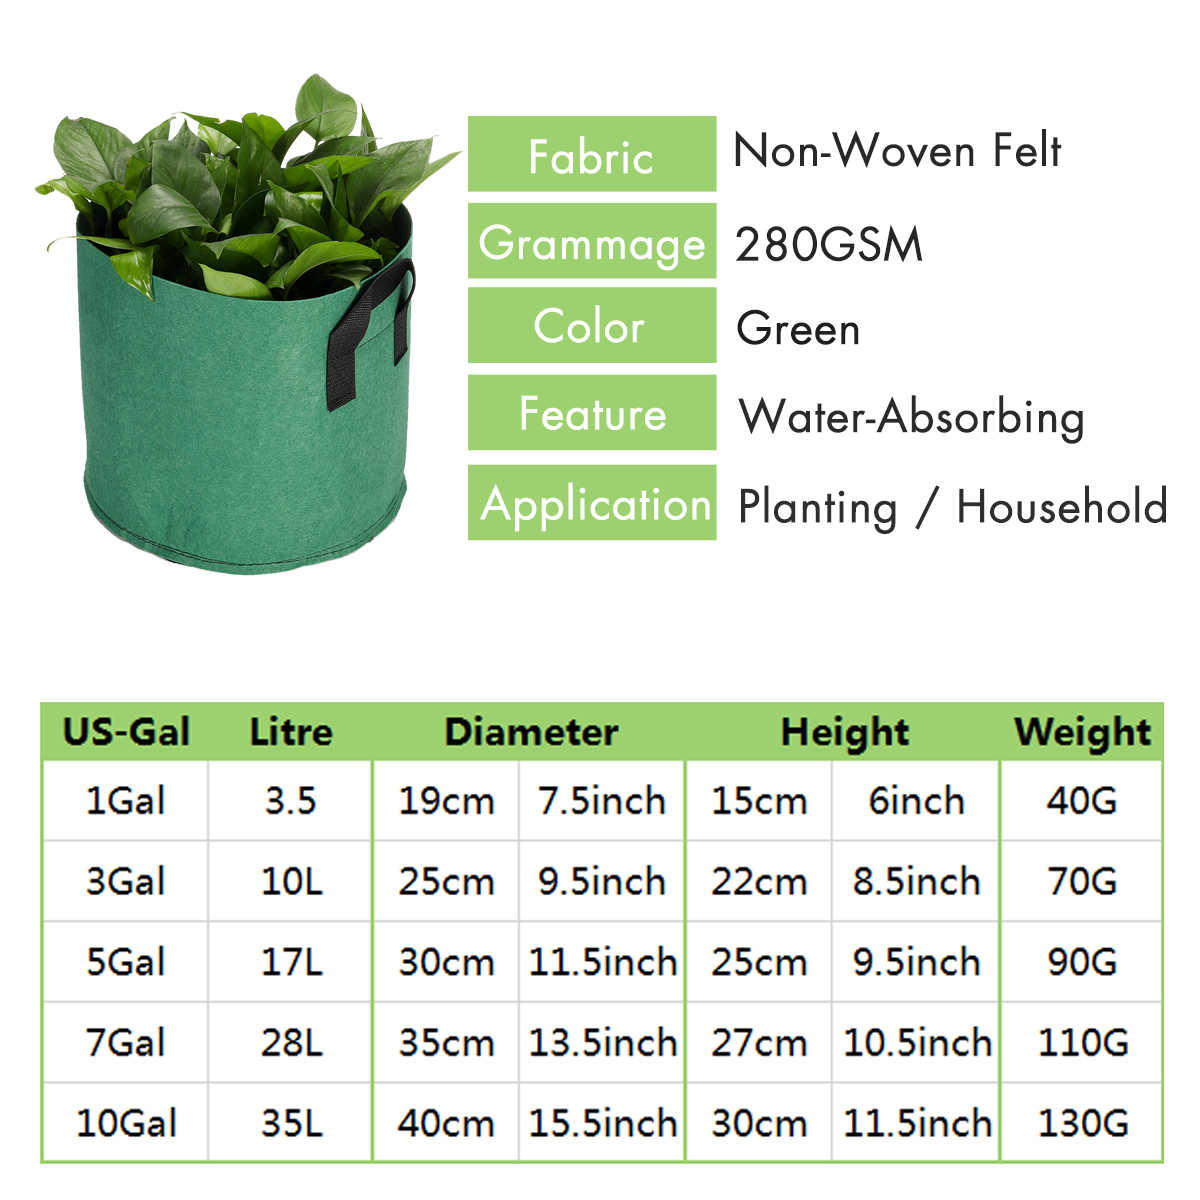 1235710Gallon-Felt-Non-Woven-Pots-Plant-Grow-Bag-Planting-Pouch-Container-Nursery-Seedling-Planting--1543442-8